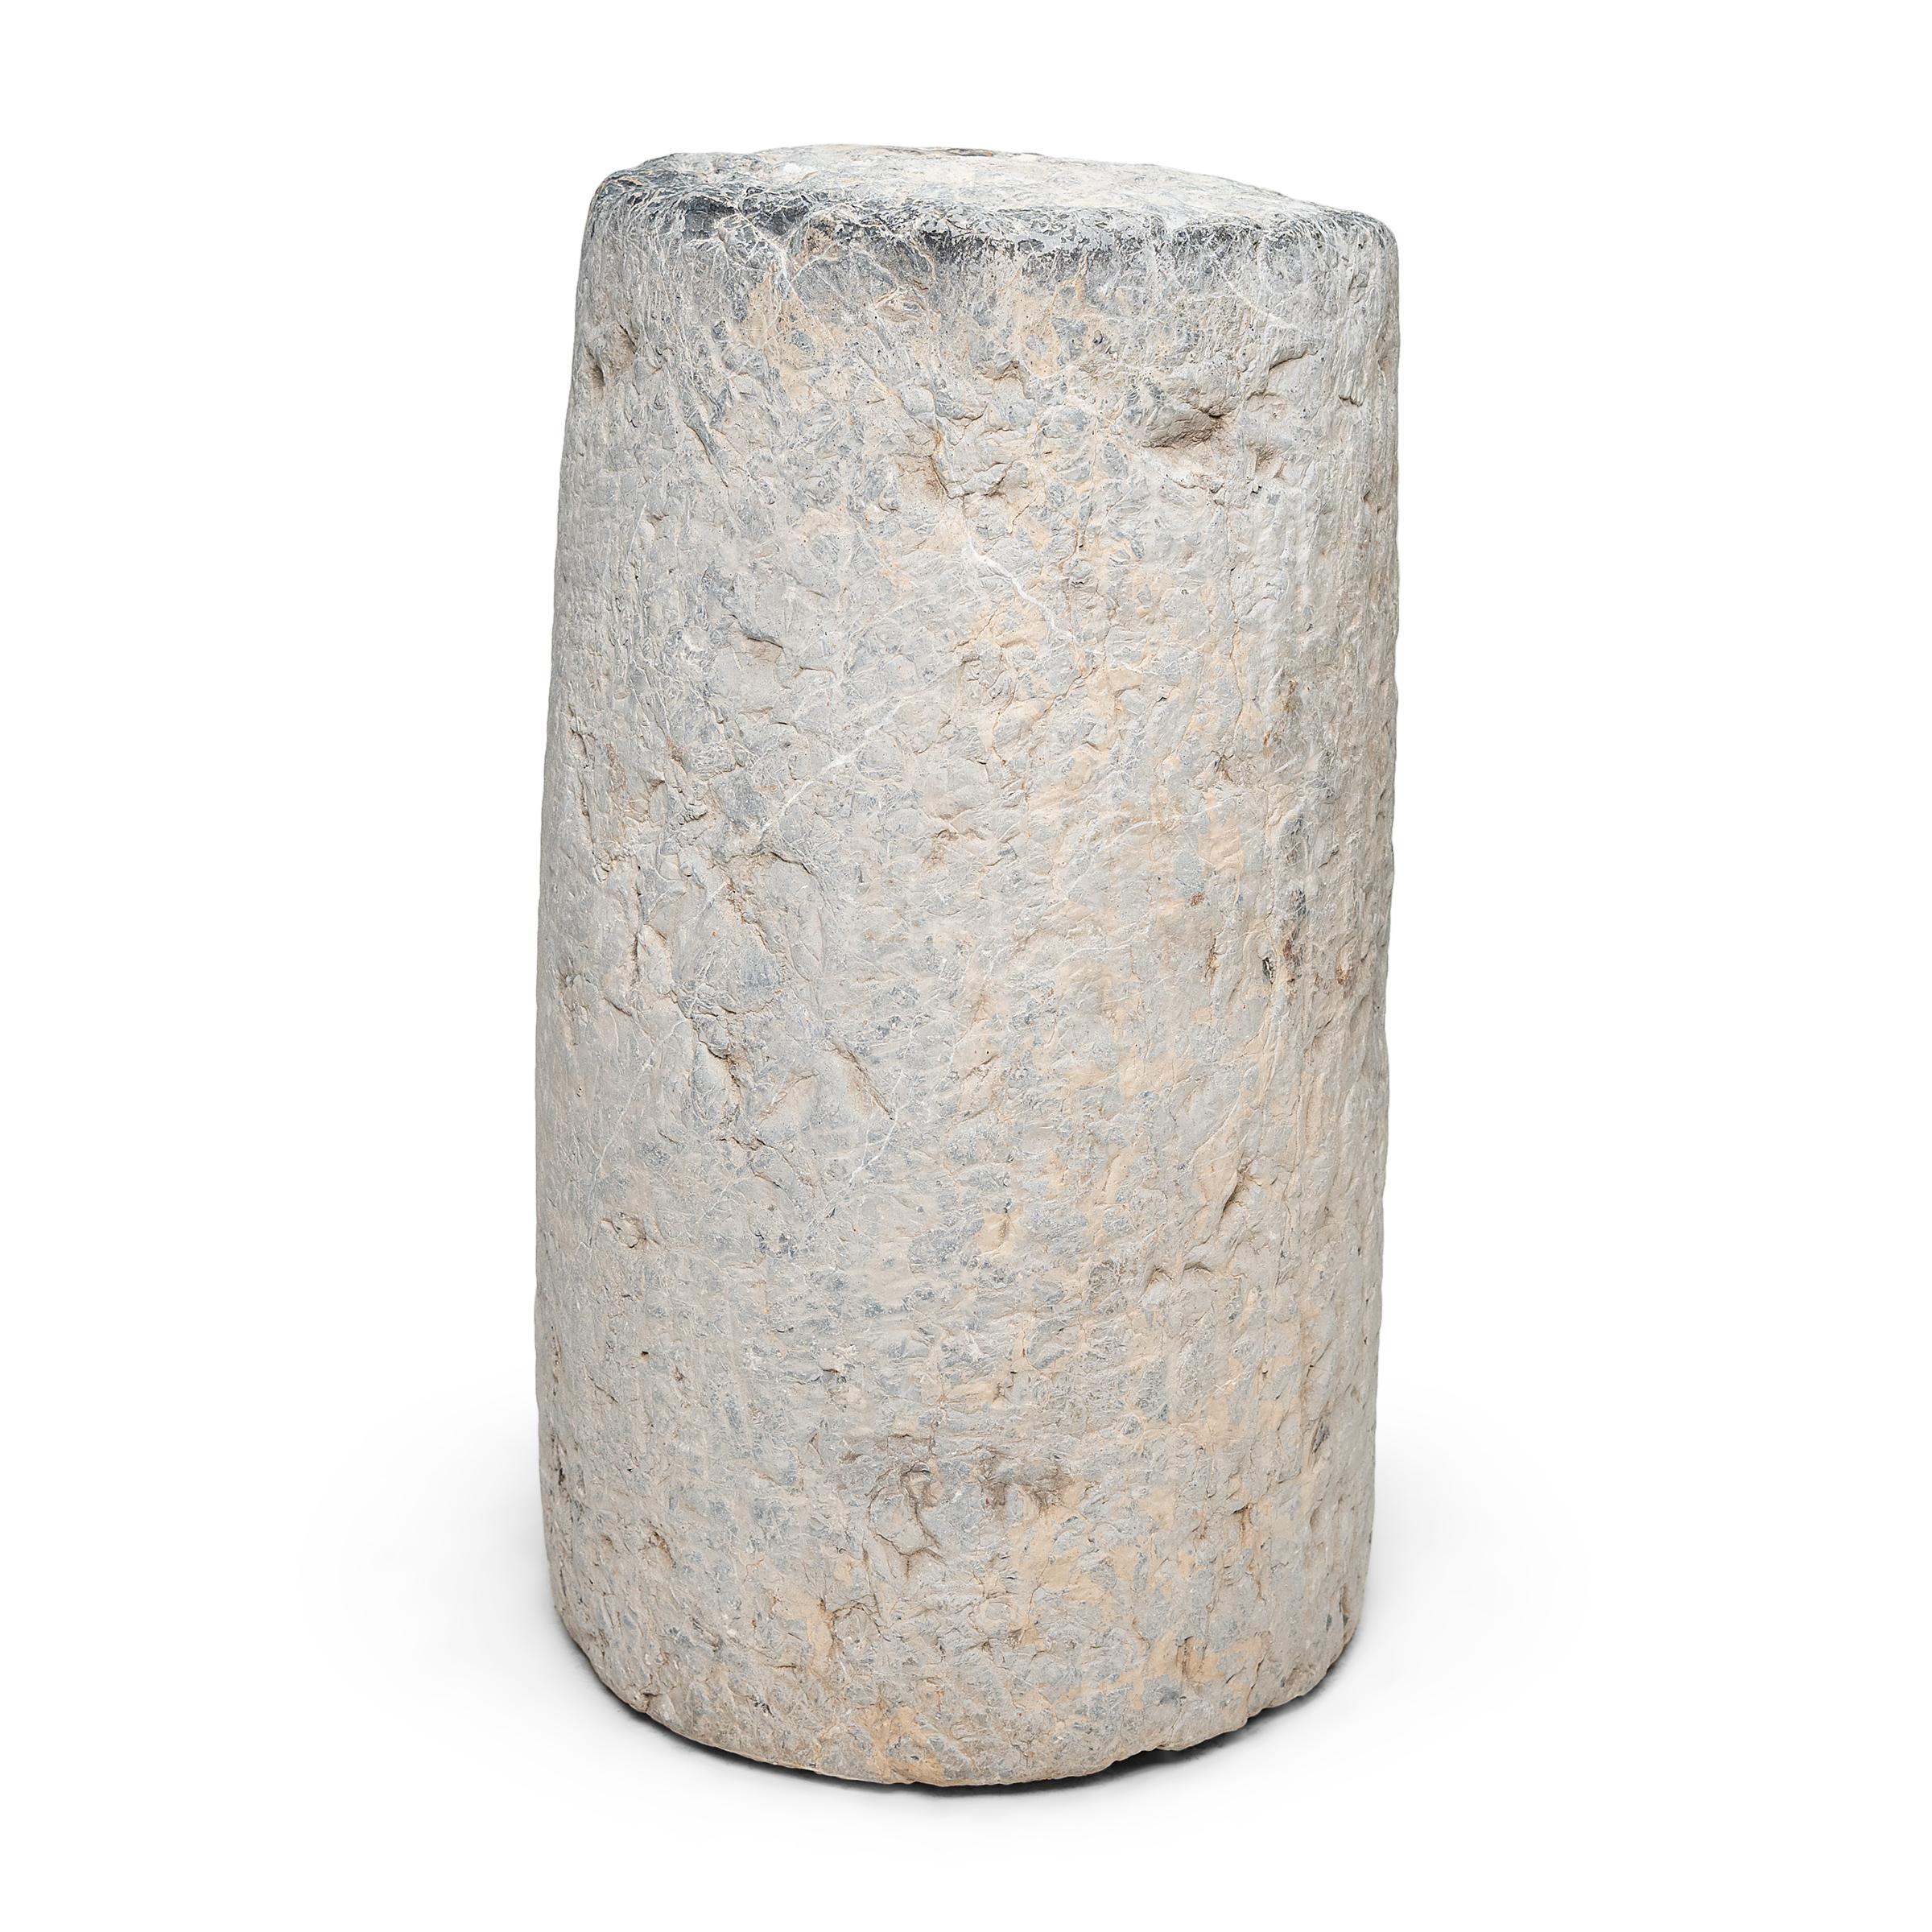 This low stone pedestal is an early 19th-century mill stone or roller stone, used for threshing grain on a farm in China's Shanxi province. The heavy stone would have been would have been pulled across a grain harvest, by man or ox, to separate the